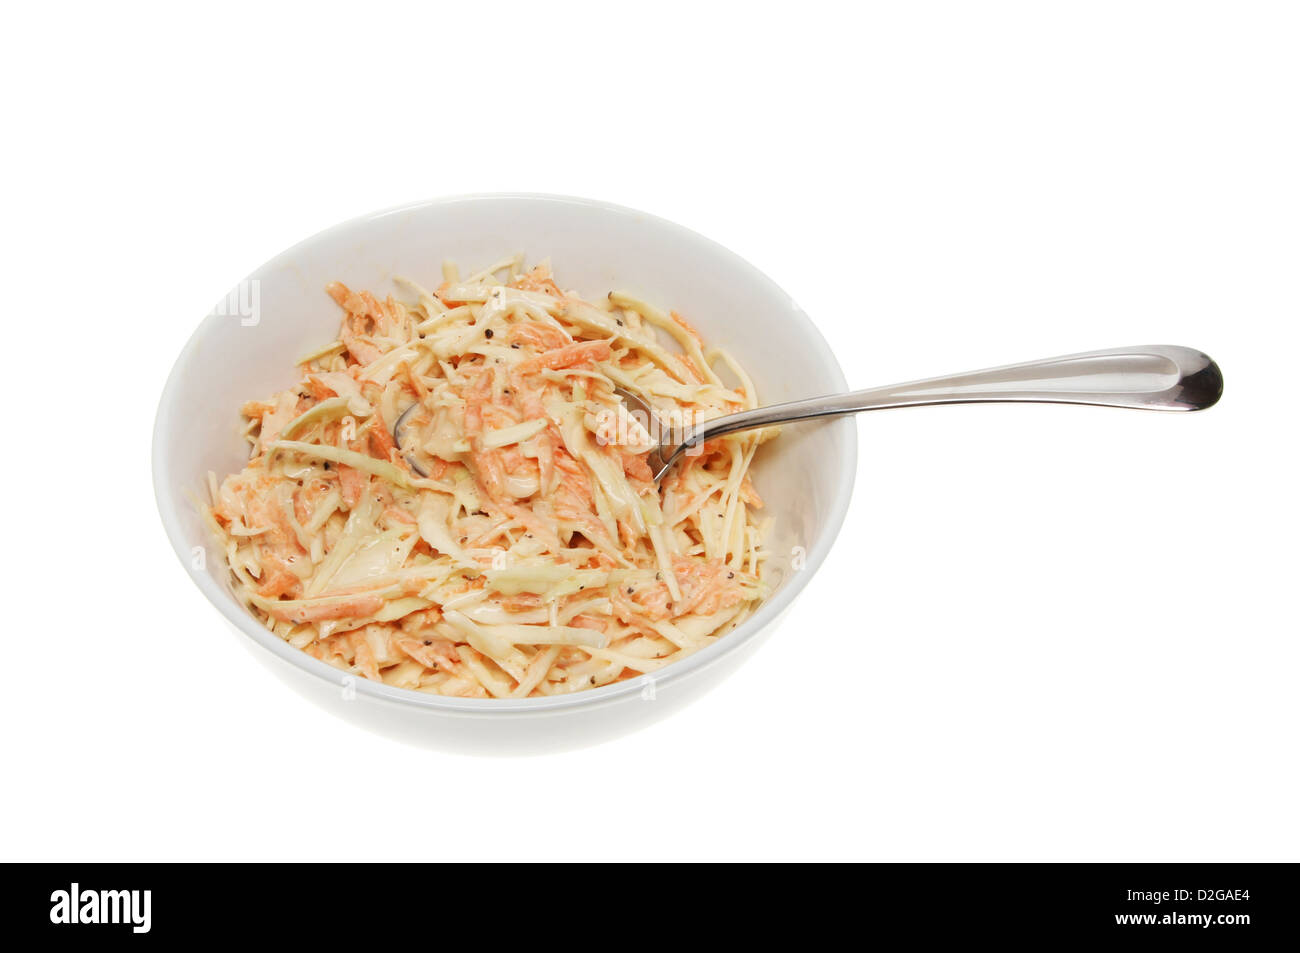 Coleslaw in a bowl with a spoon isolated against white Stock Photo